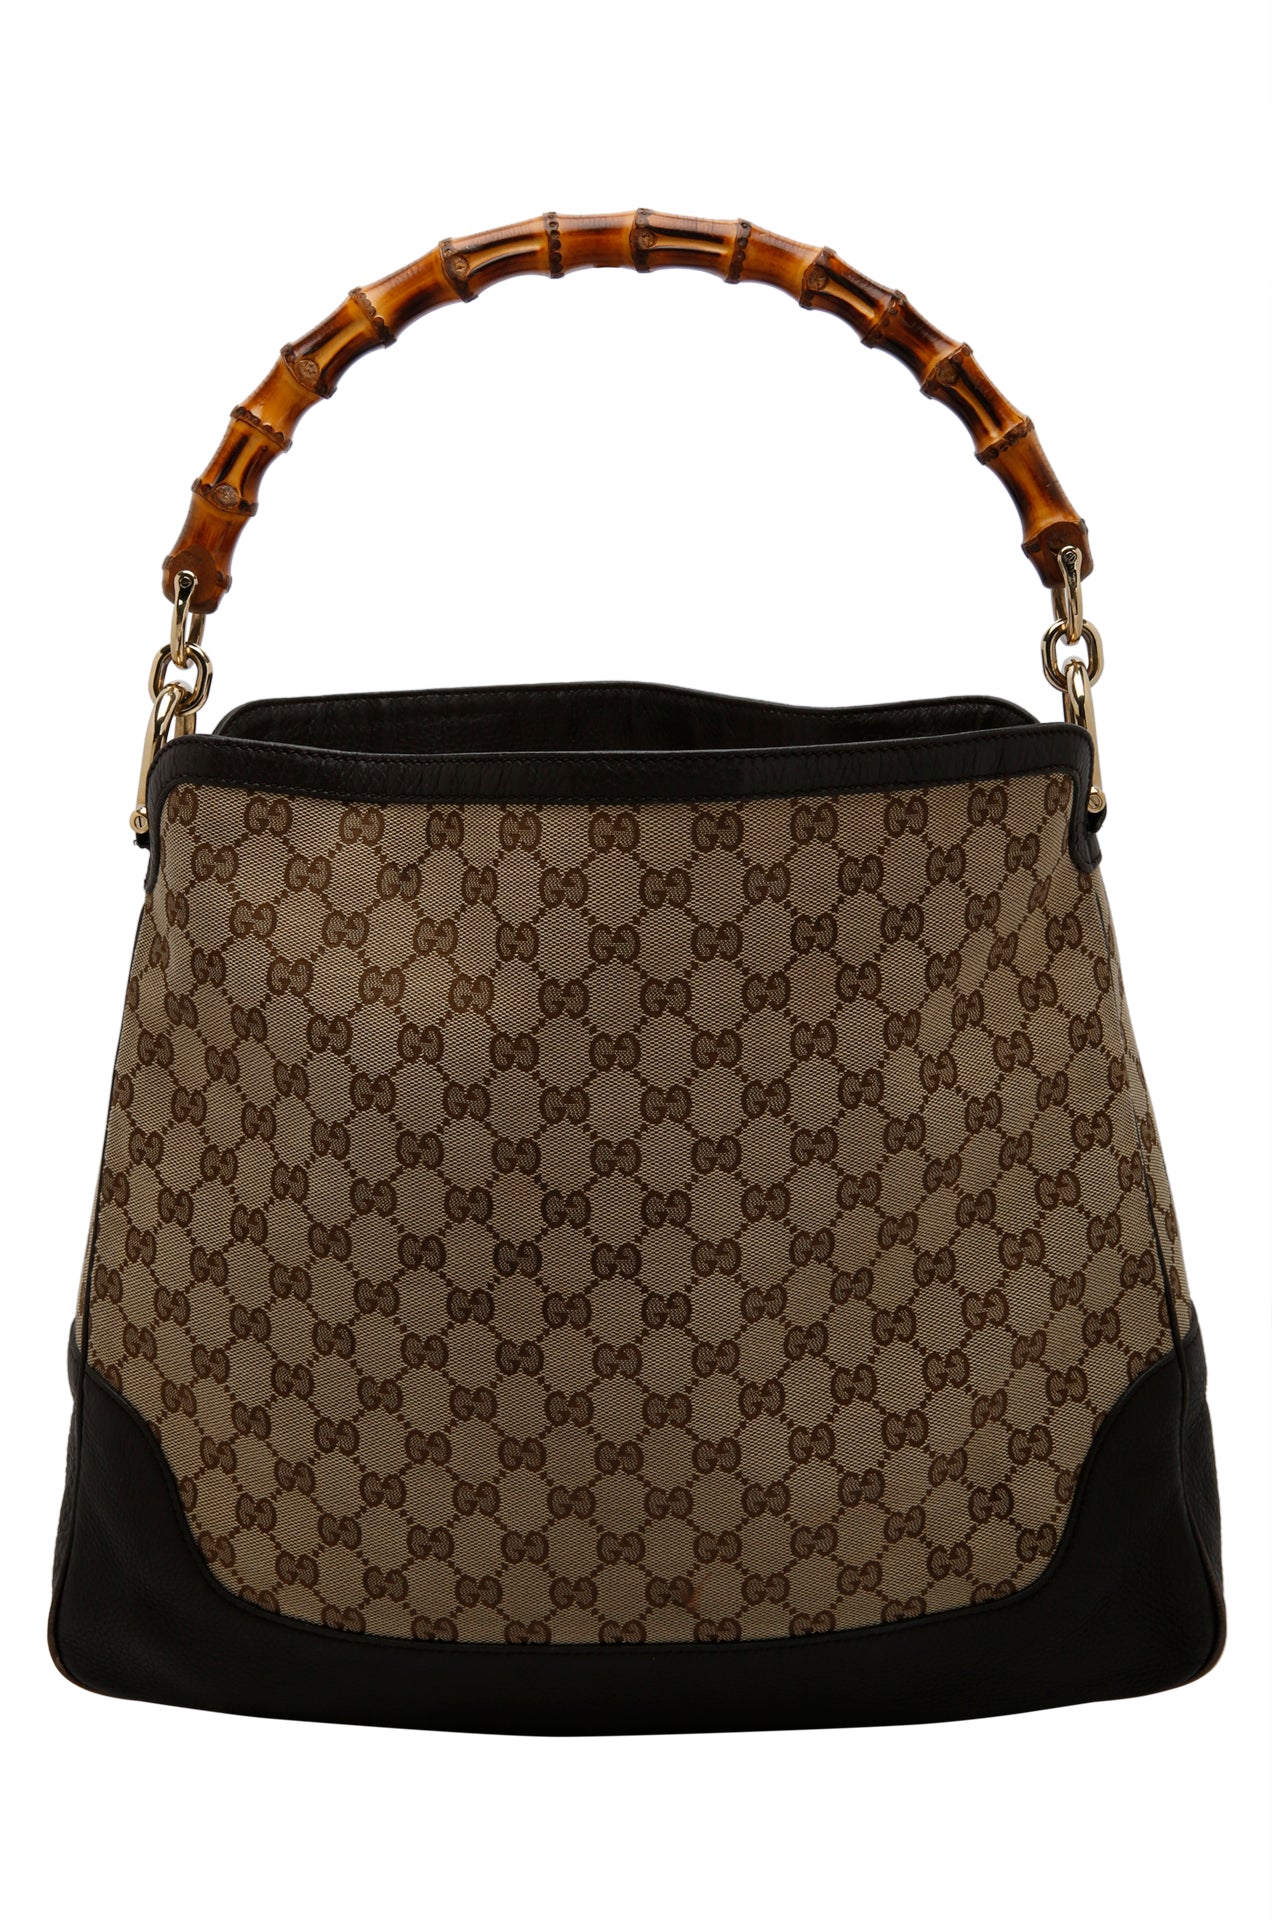 Gucci Beige Ebony GG Canvas Leather Peggy Bamboo Top Handle Bag